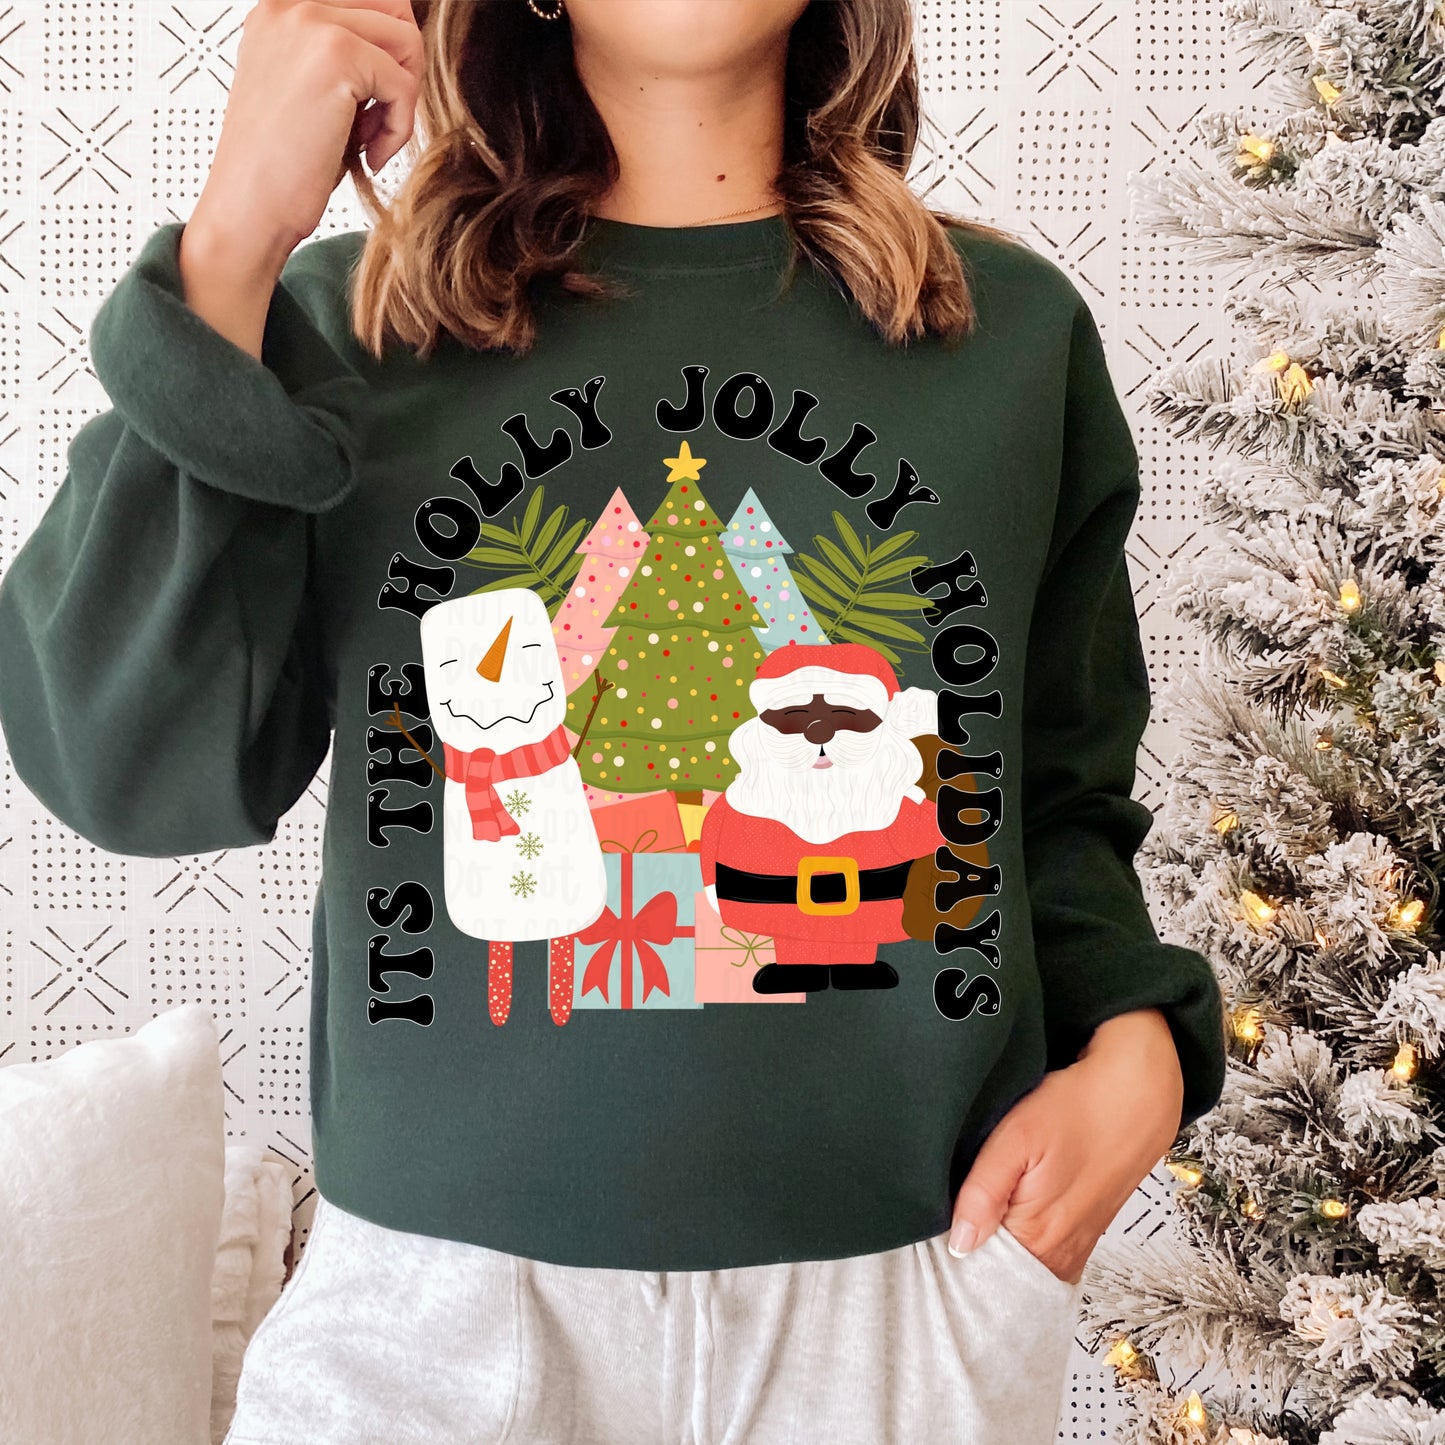 Its The Holly Jolly Holidays Digital Download | 5 Skin Tones Included